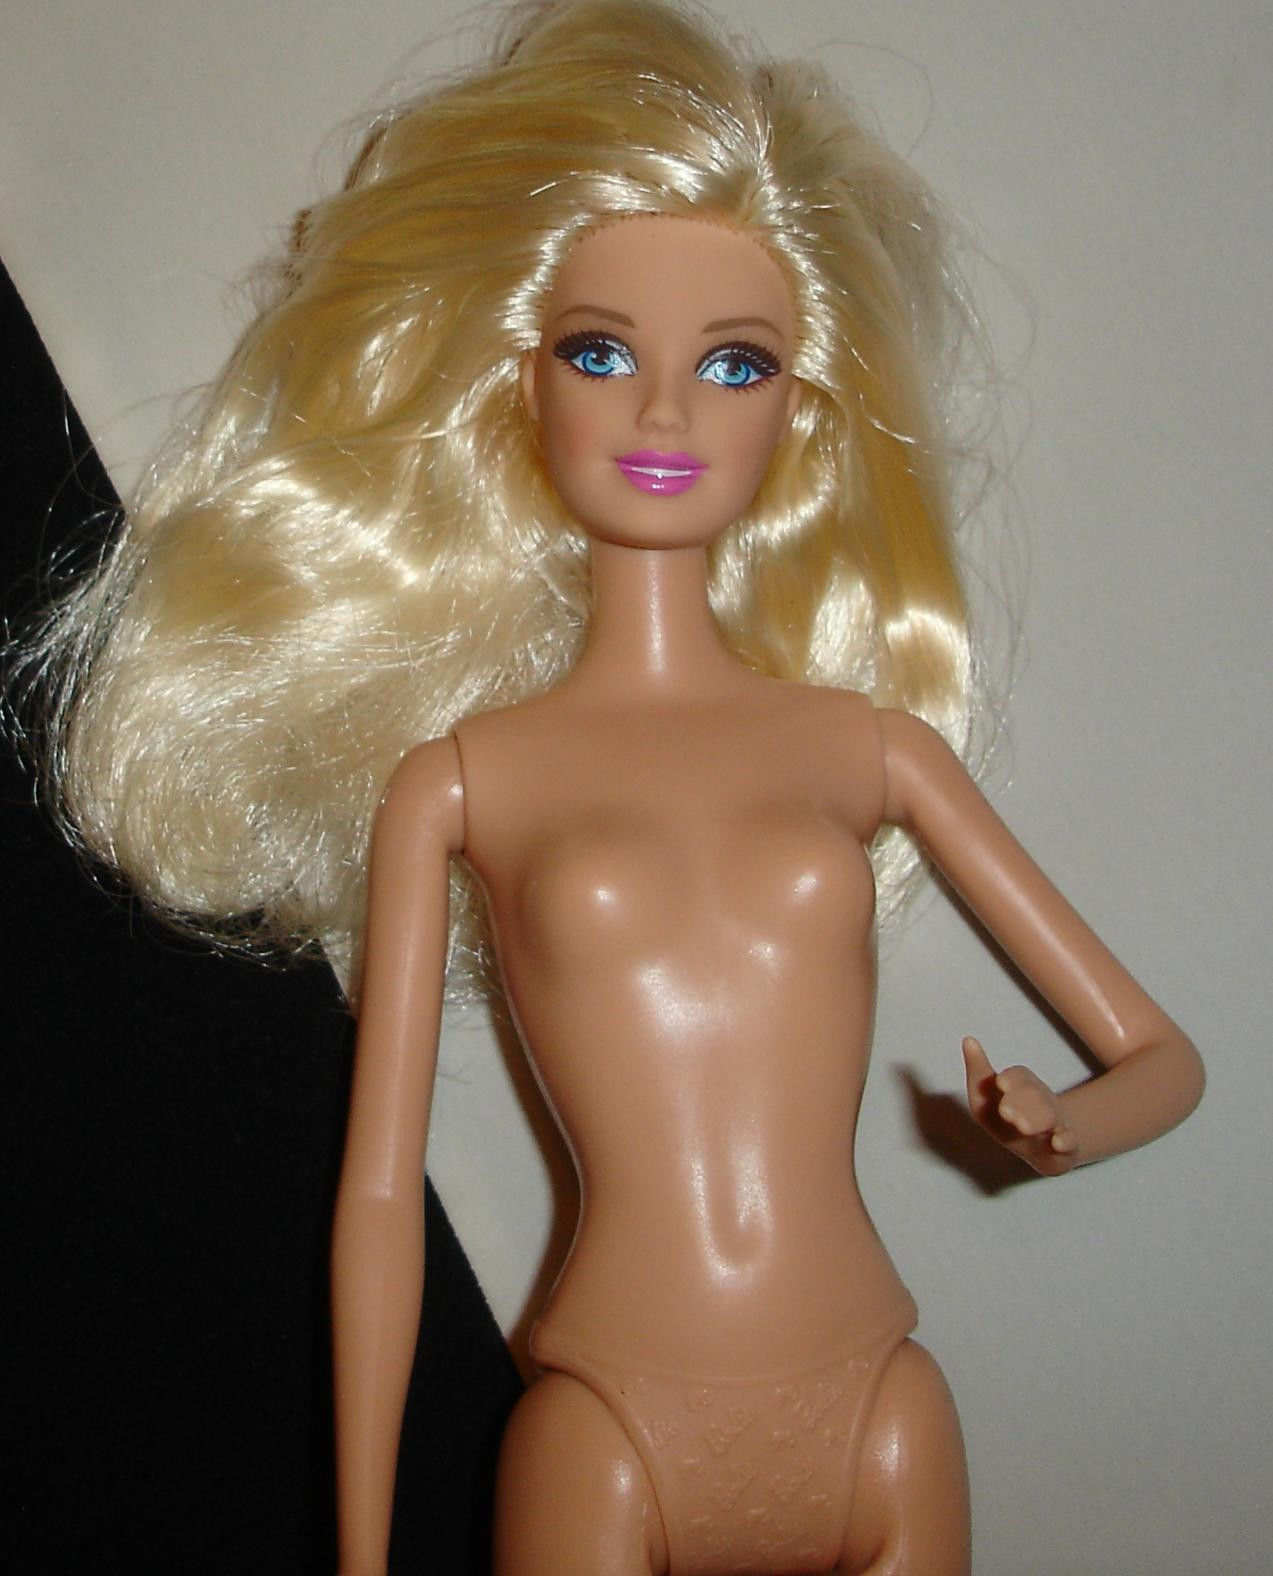 Barbie Doll - Barbie doll nude with beautiful blue eyes and 35 similar items